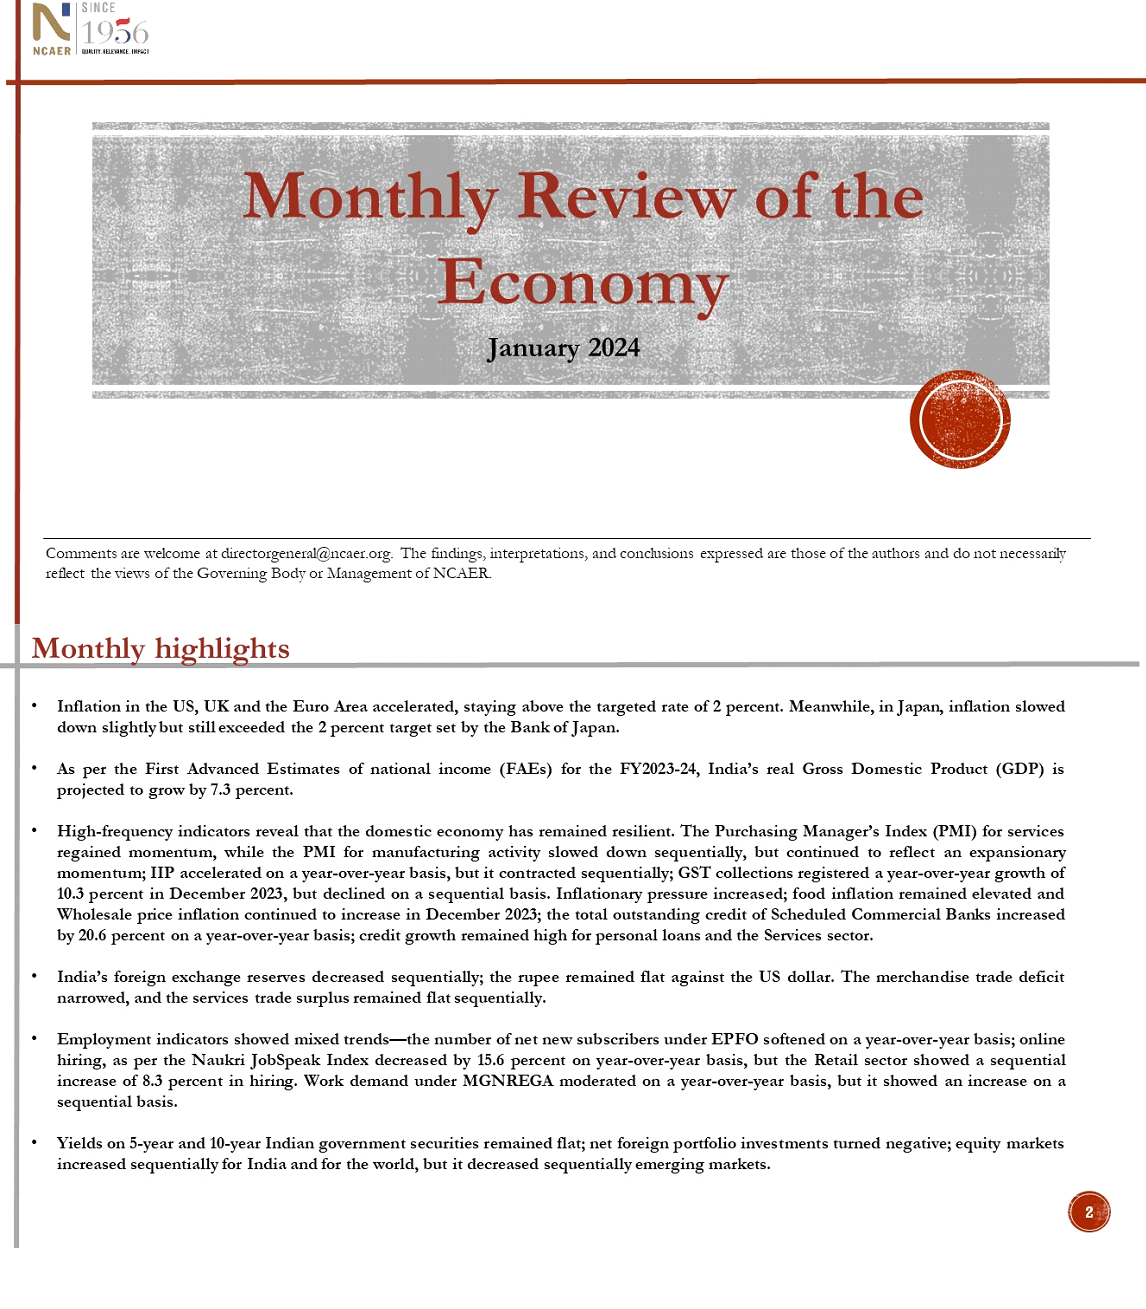 Monthly Review of the Economy: January 2024